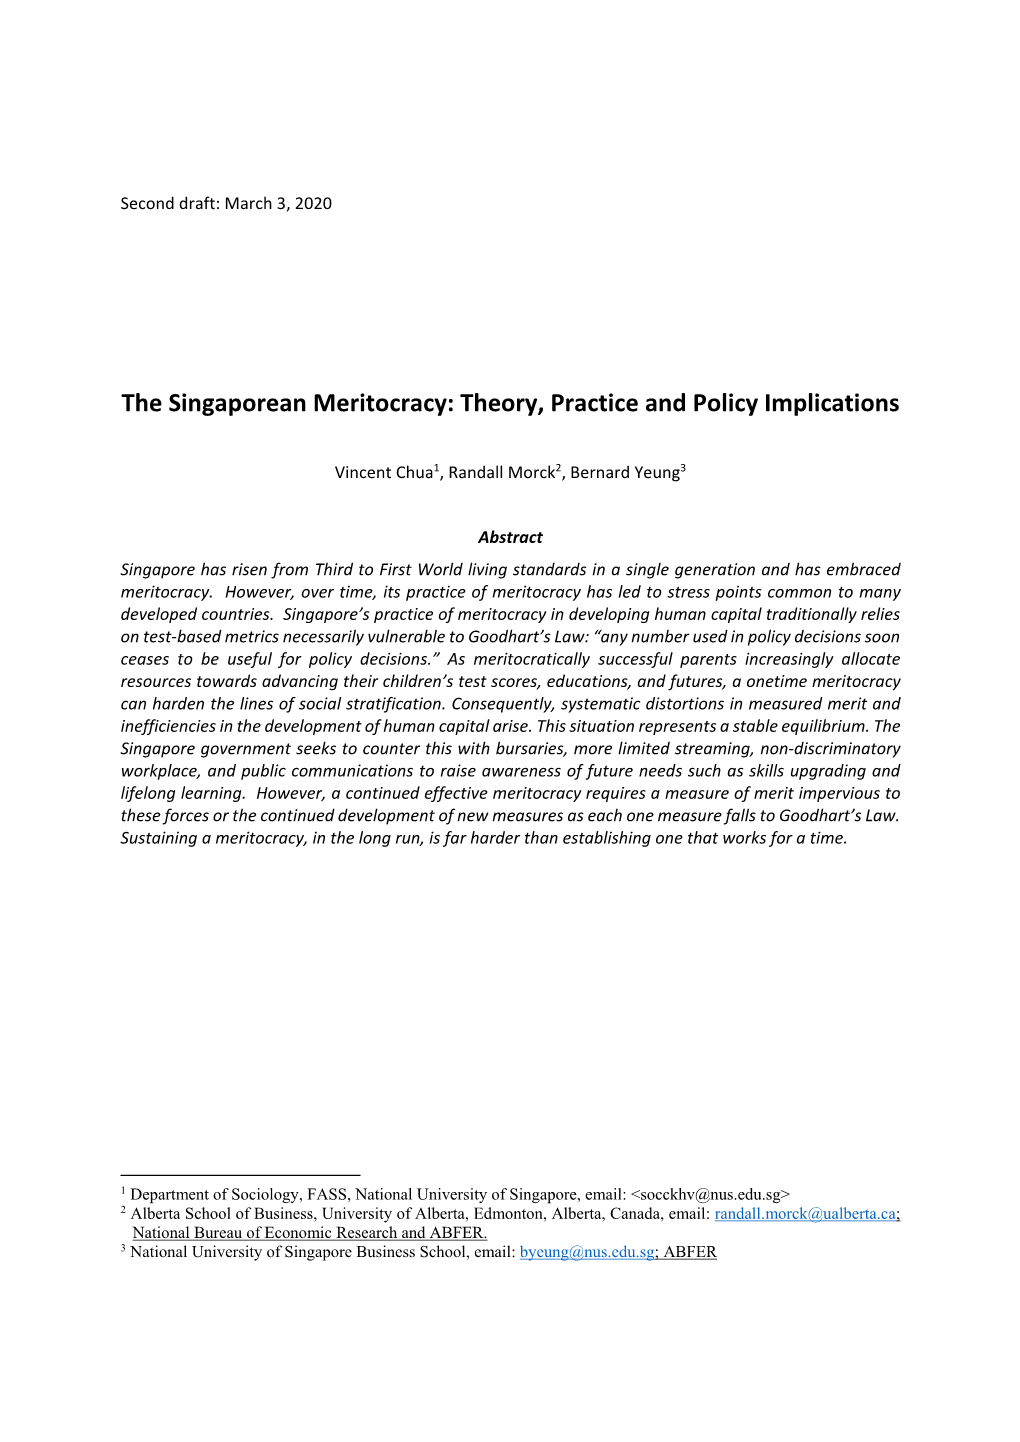 The Singaporean Meritocracy: Theory, Practice and Policy Implications